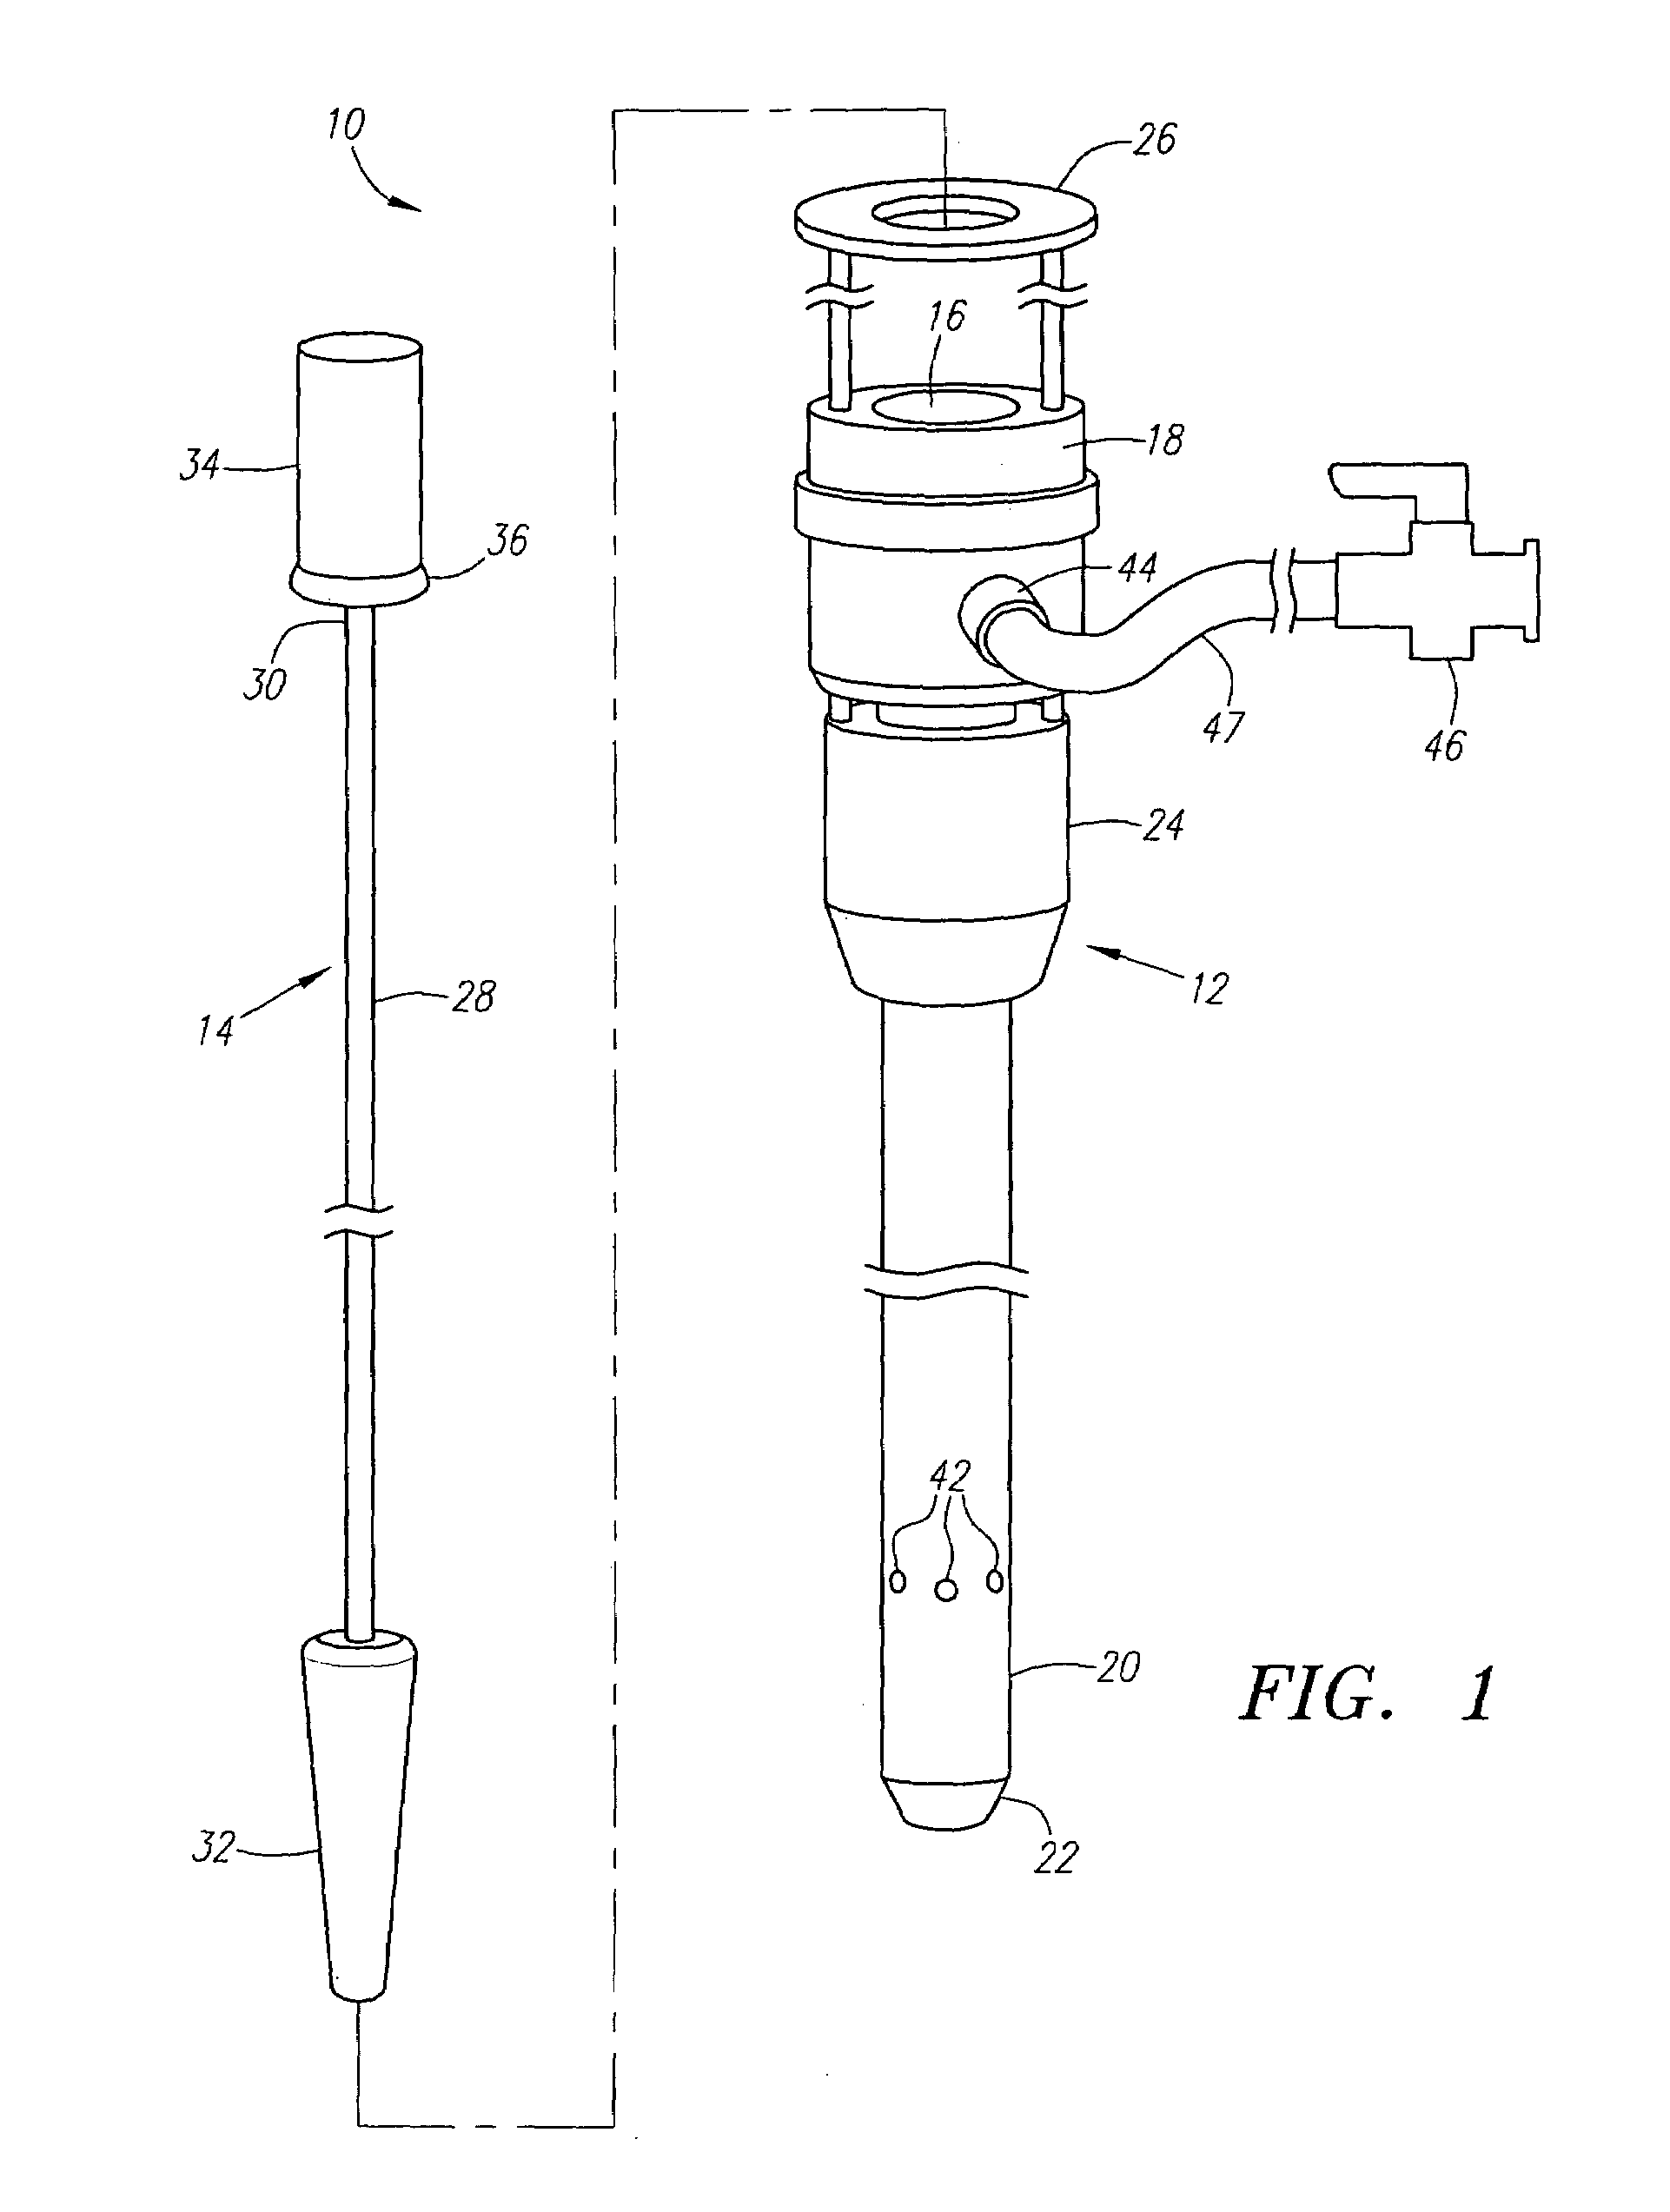 Apparatus and methods for positioning a vascular sheath